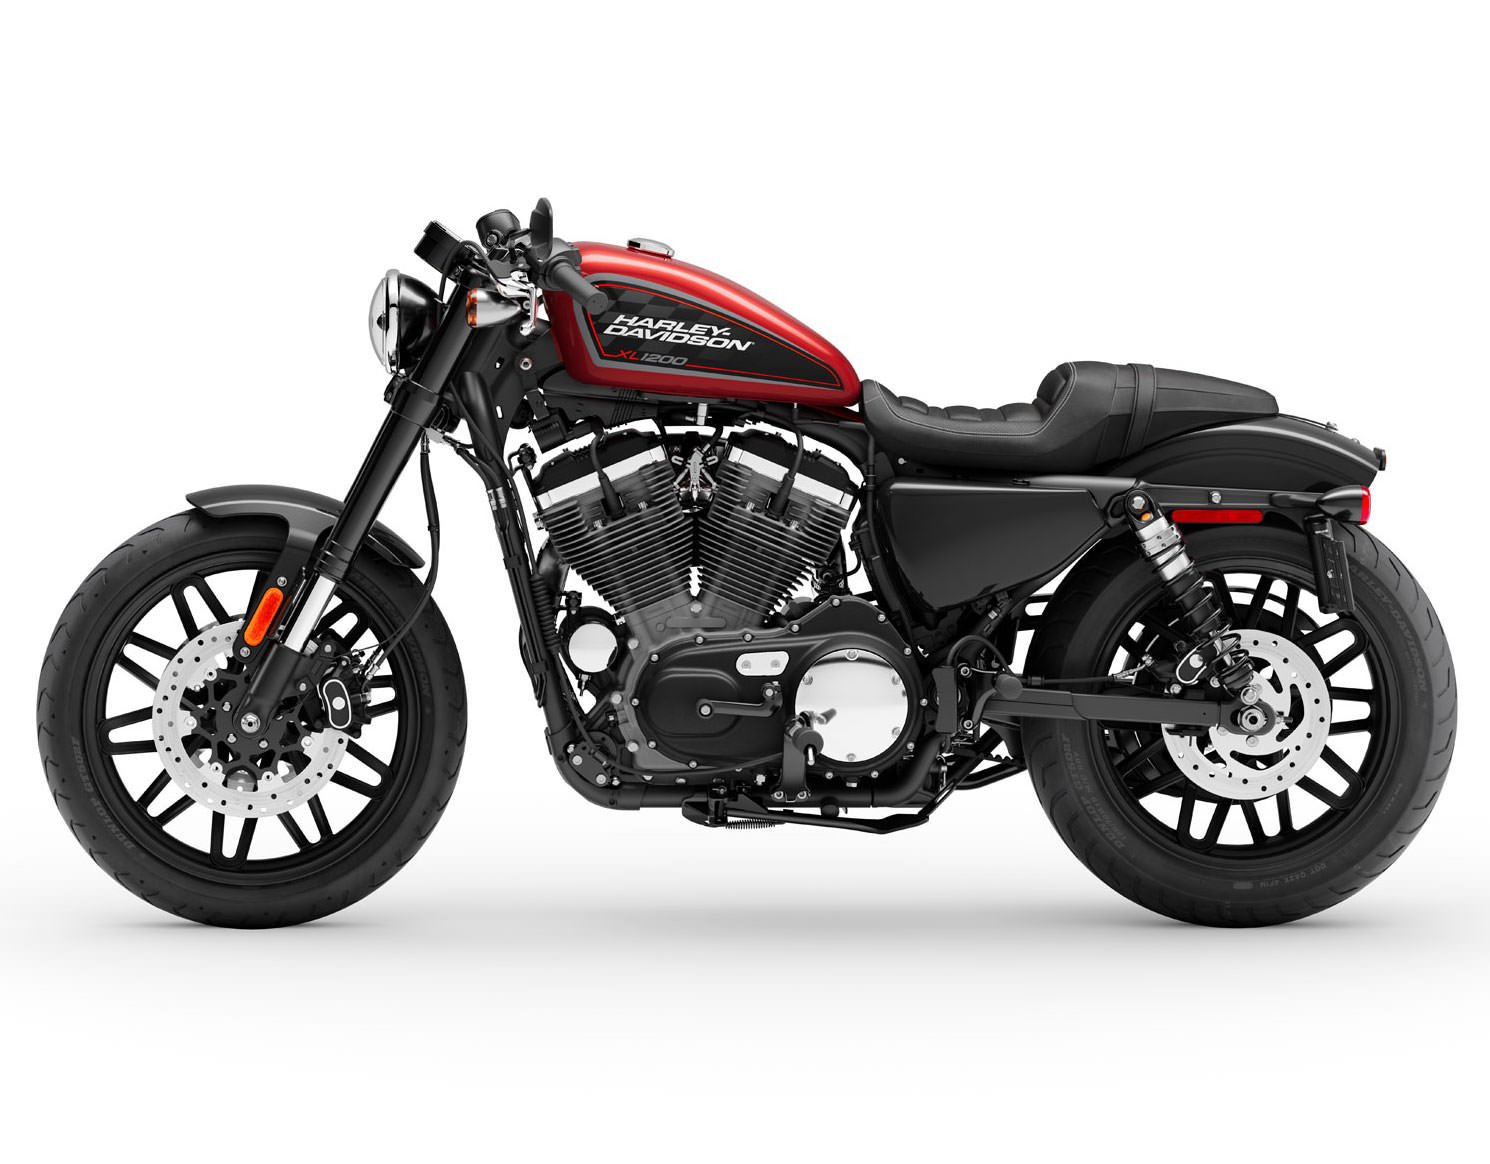 The Harley Davidson Sportster The Essential Free Buying Guide